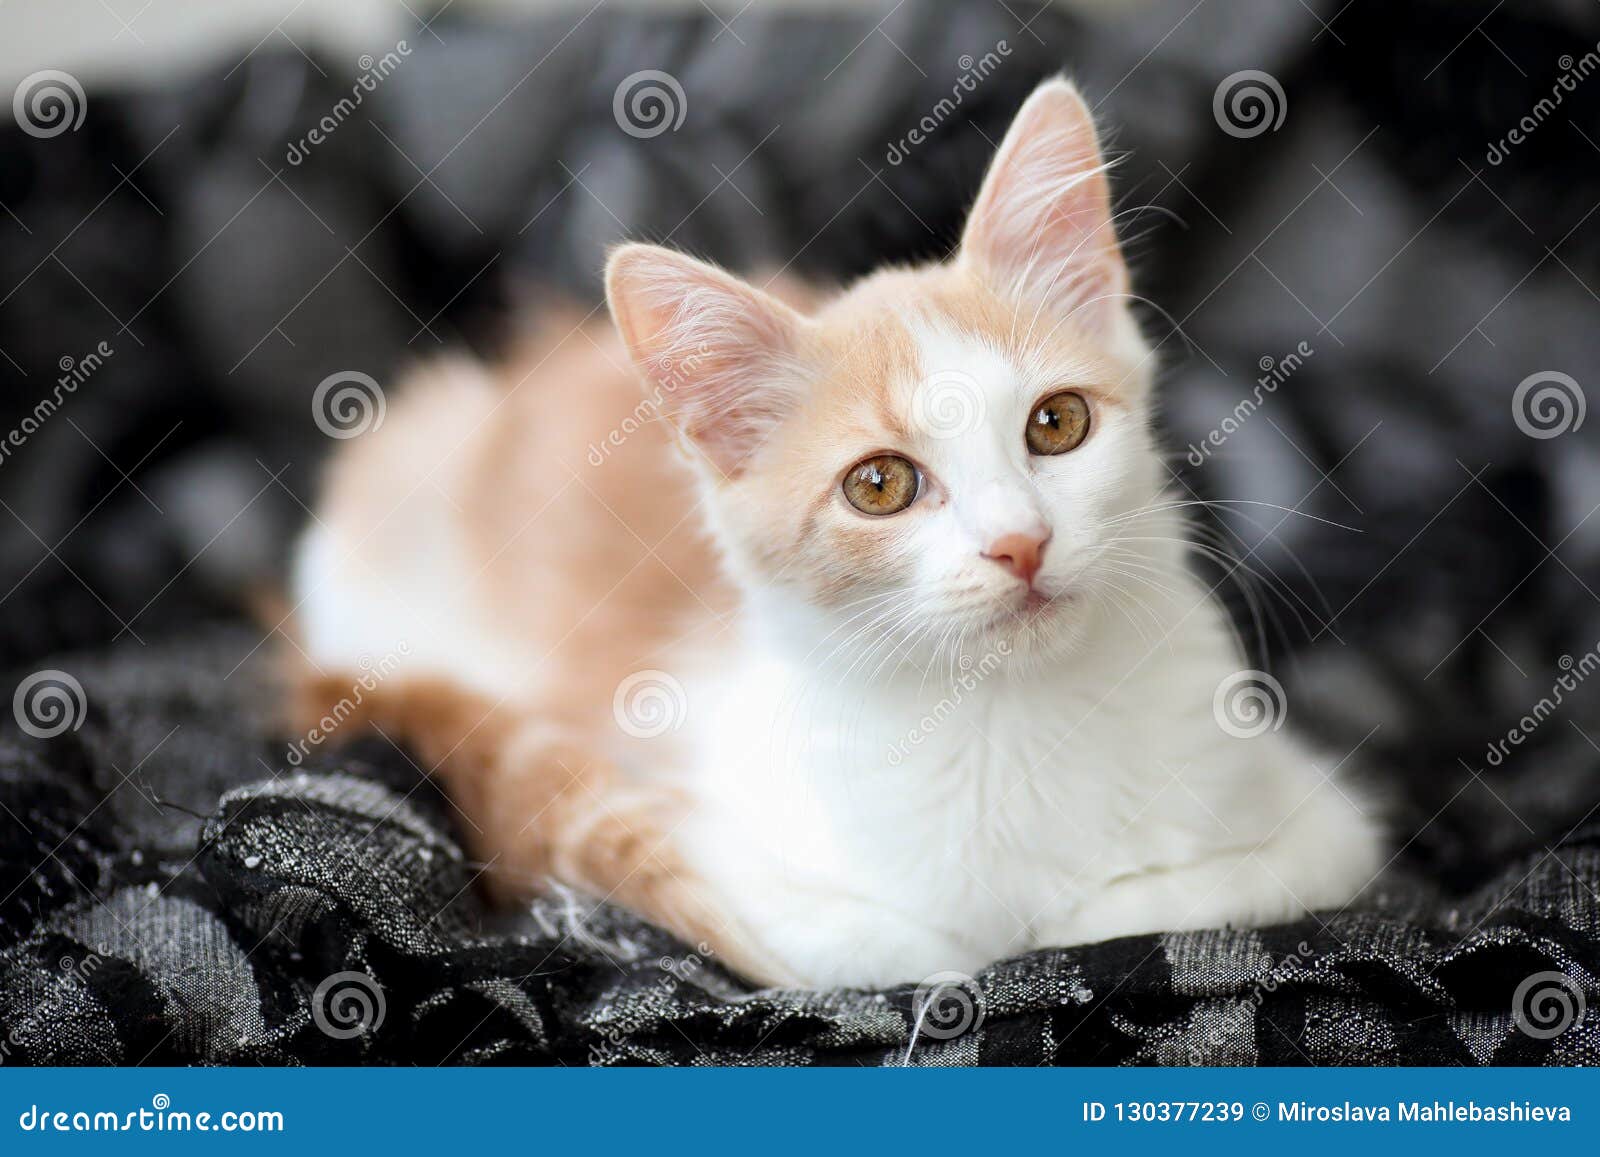 ginger and white tabby cat